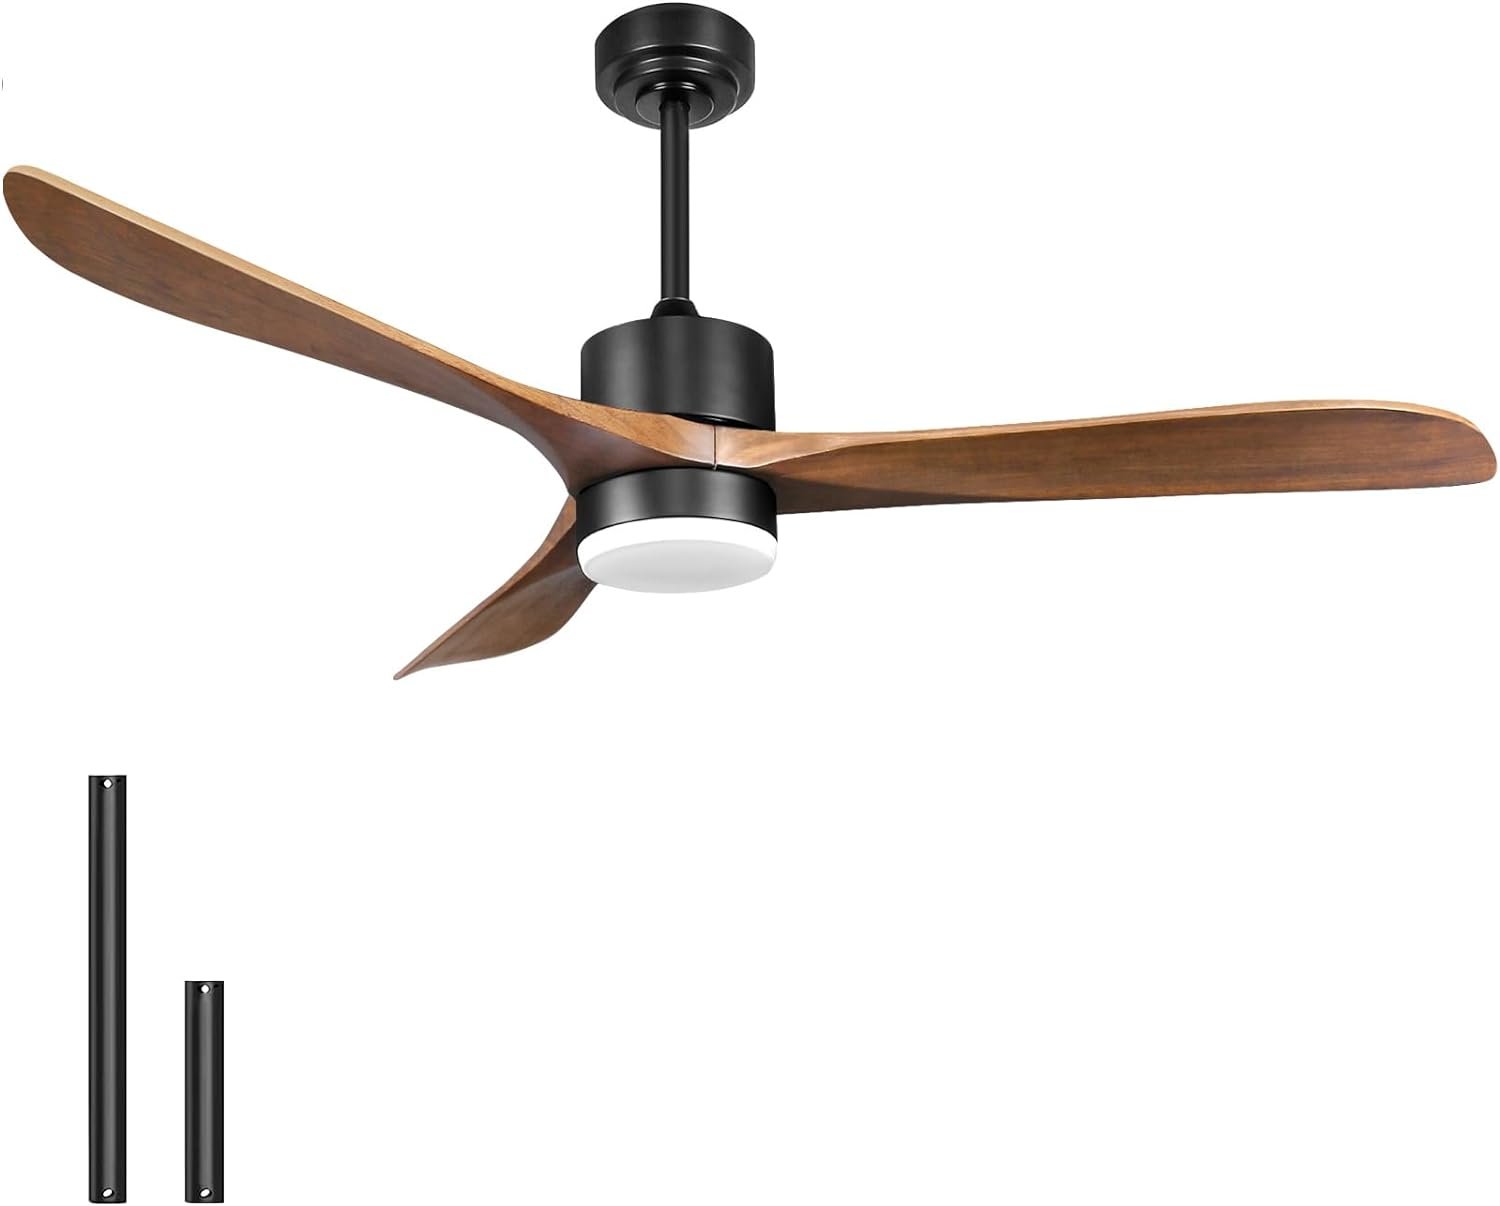 Wisful Ceiling Fans with Lights Remote Control Review